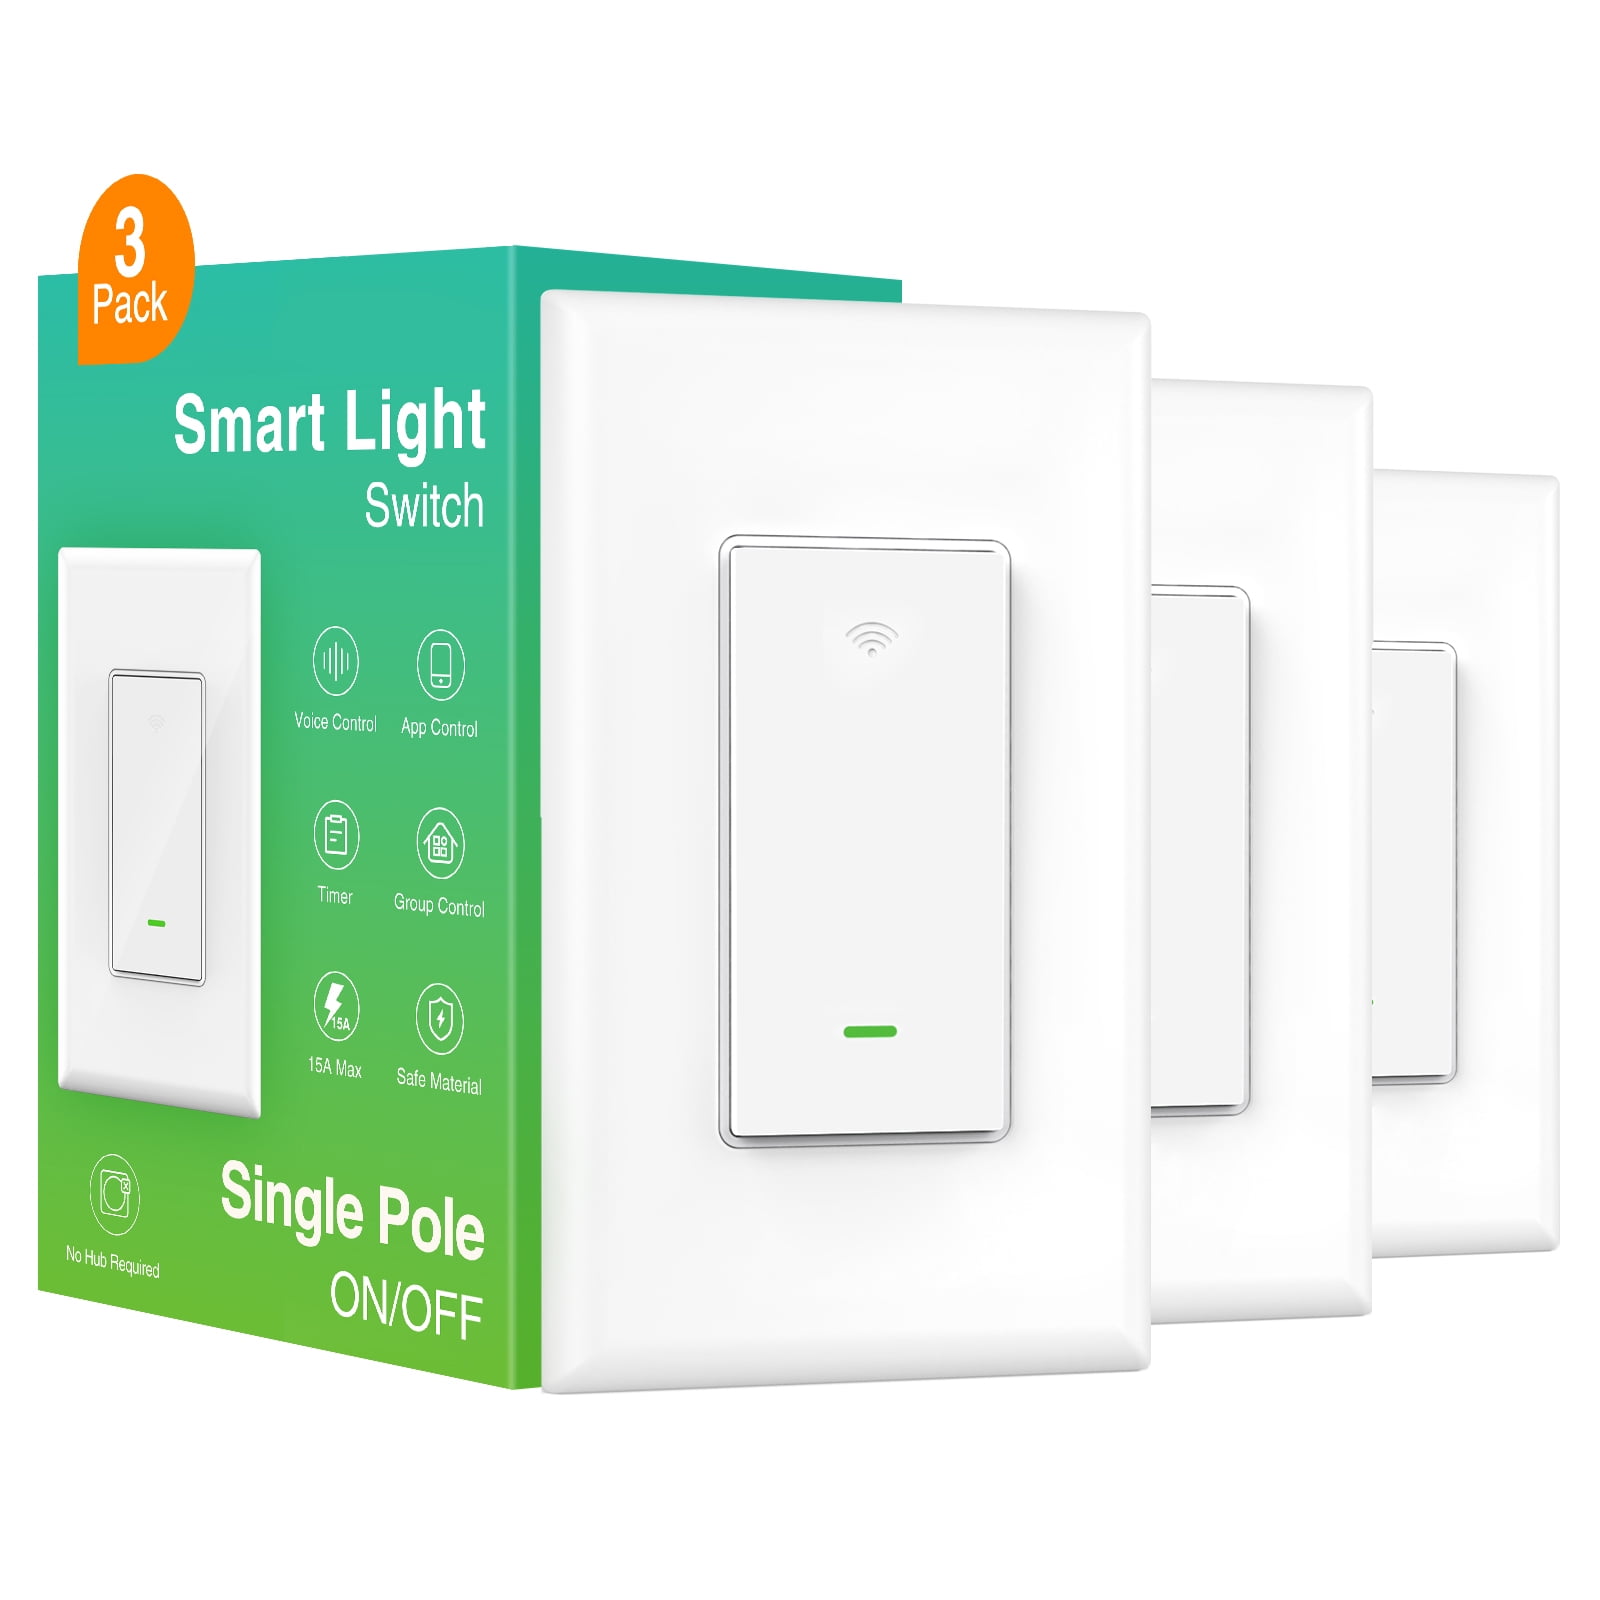 2 Pack Smart Light Switch - WiFi Wall Switches Work with Alexa Google  Home/Smart Life App, Single Pole, Standard Plate, Neutral Wire Needed